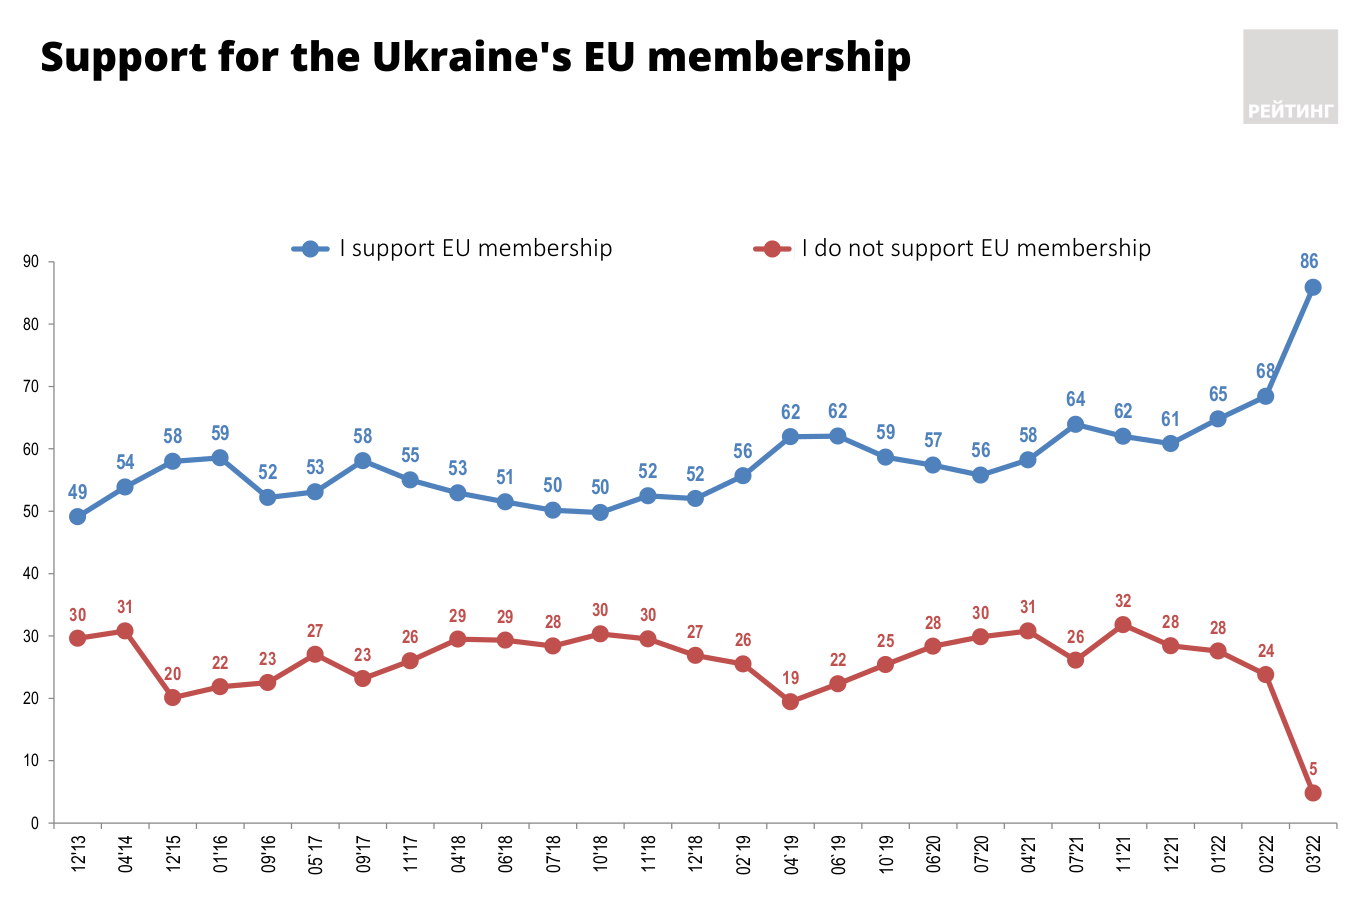 Support for Ukraine’s EU membership. Source: Rating Group results as of 1 Match 2022, translated by EP ~